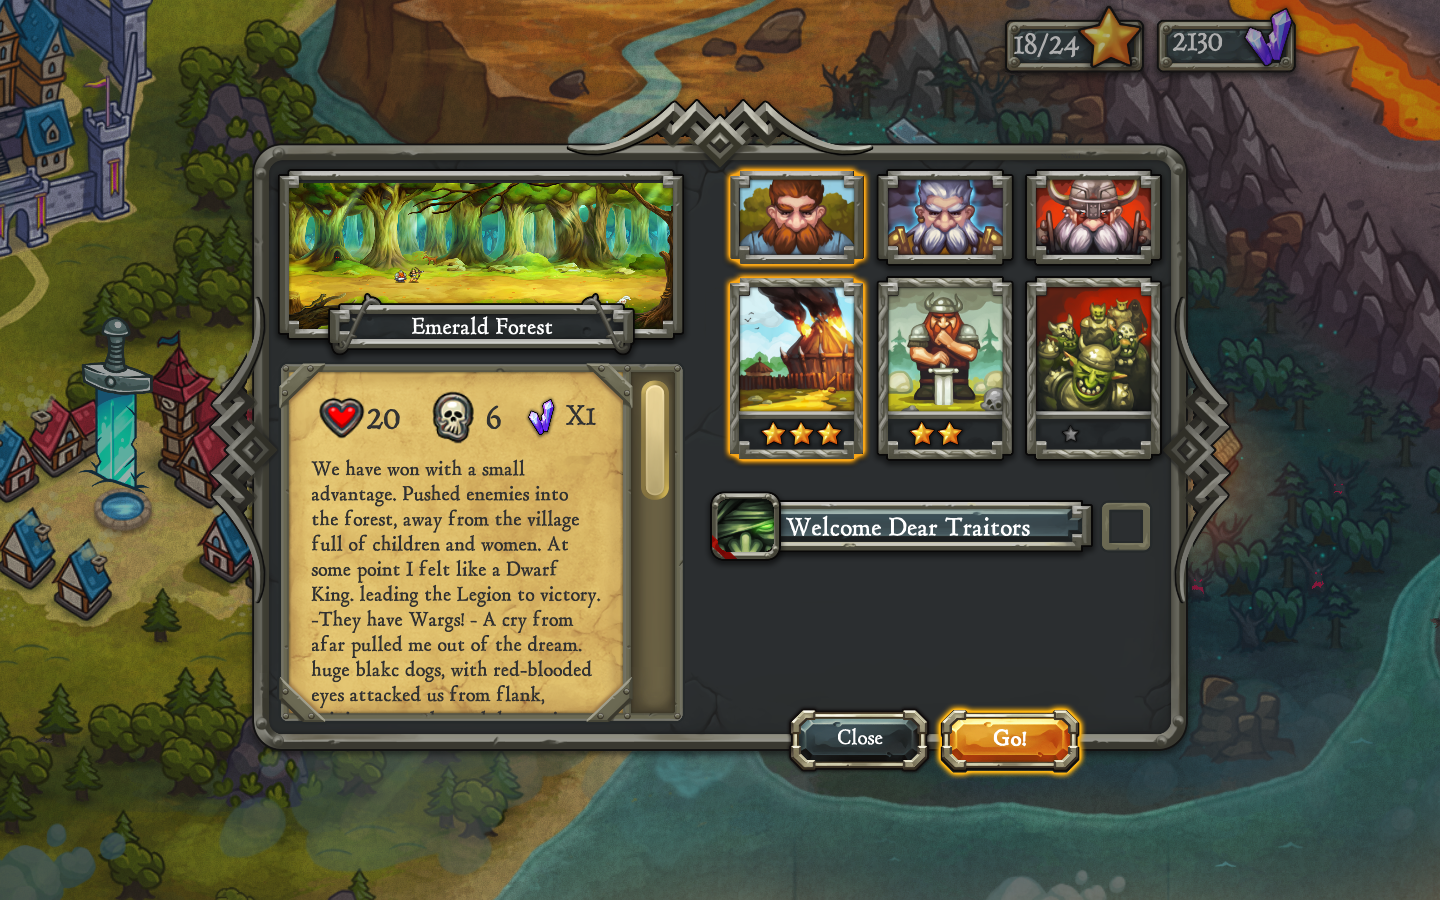 Mozilla launches multiplayer browser adventure to showcase HTML5 gaming